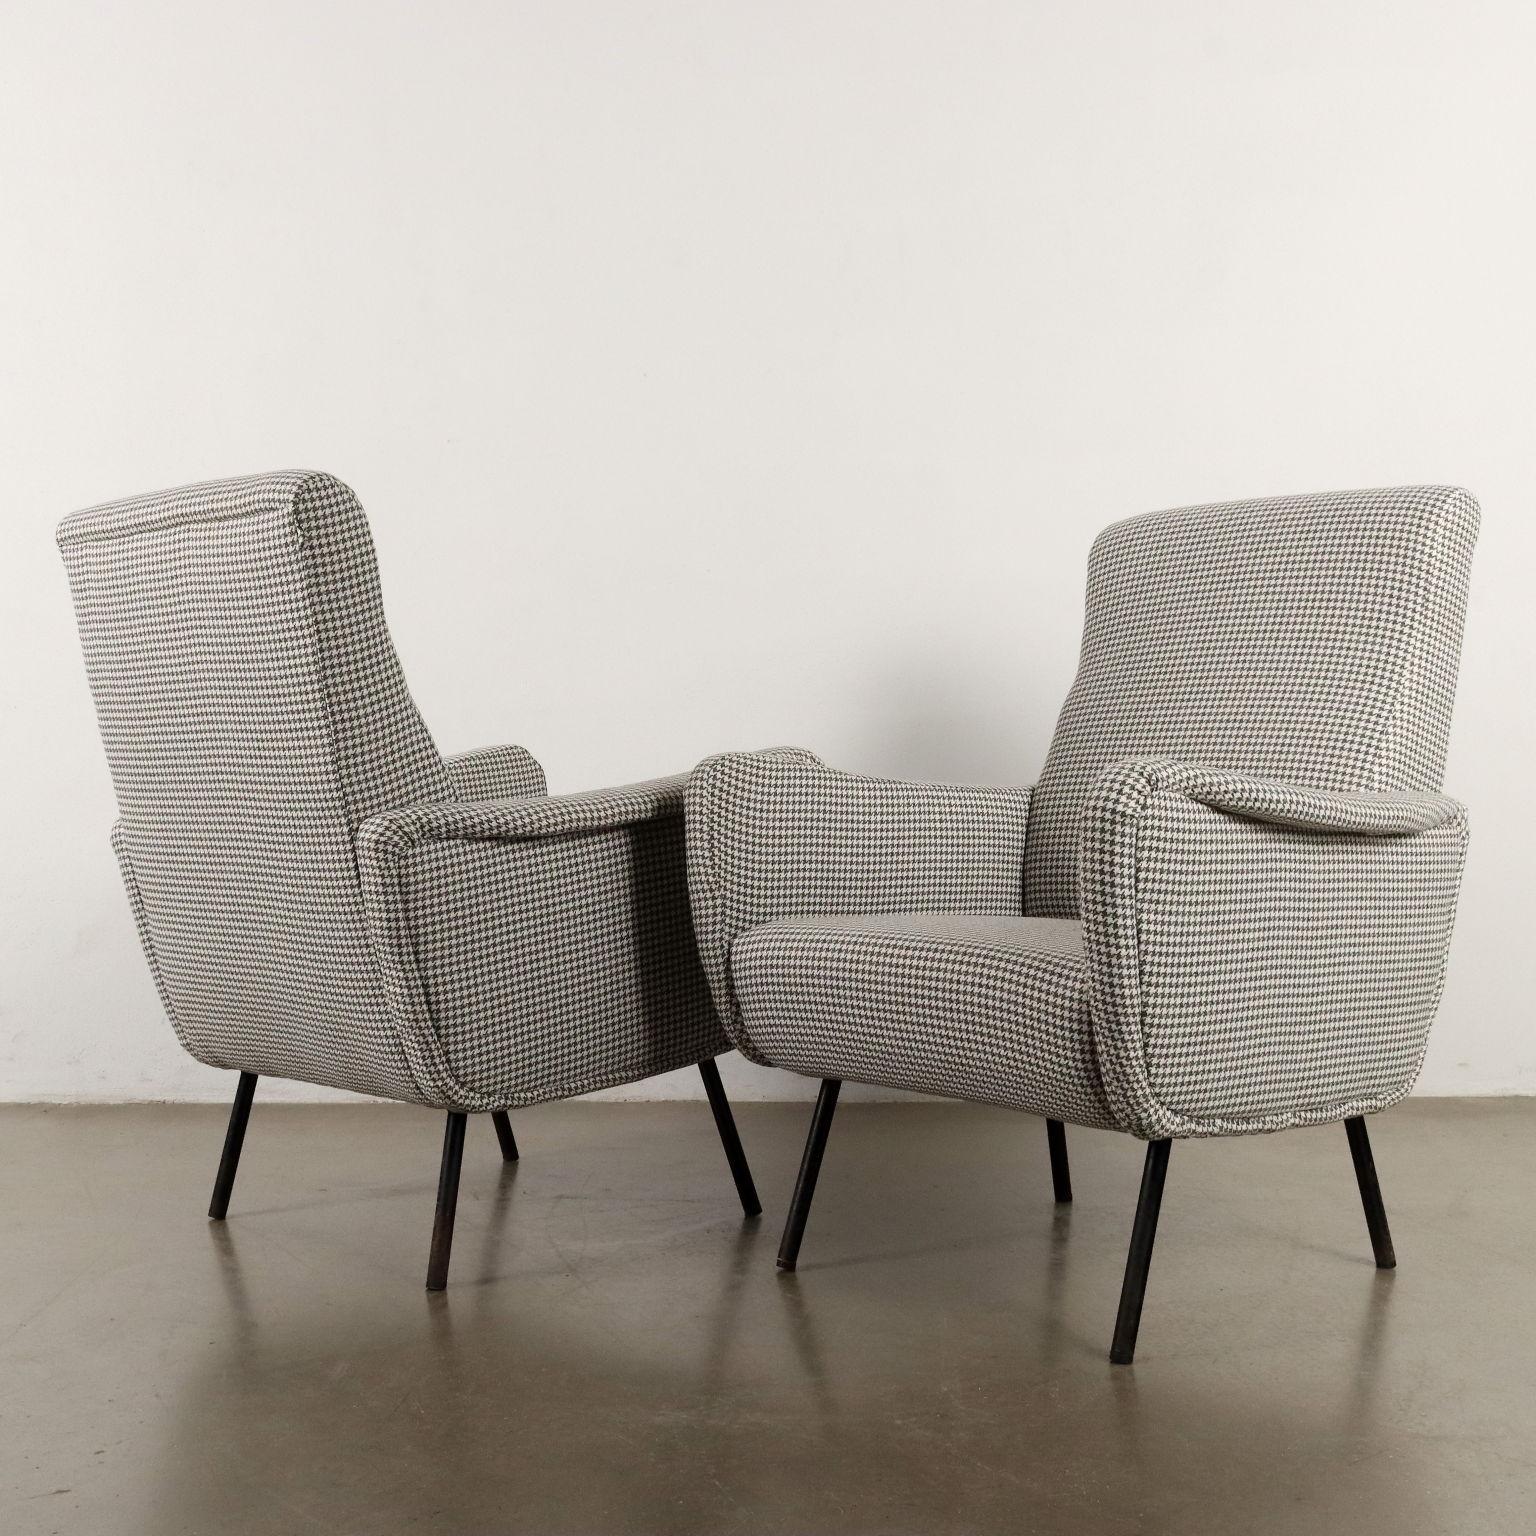 Italian Pair of Houndstooth Armchairs 1950s-1960s For Sale